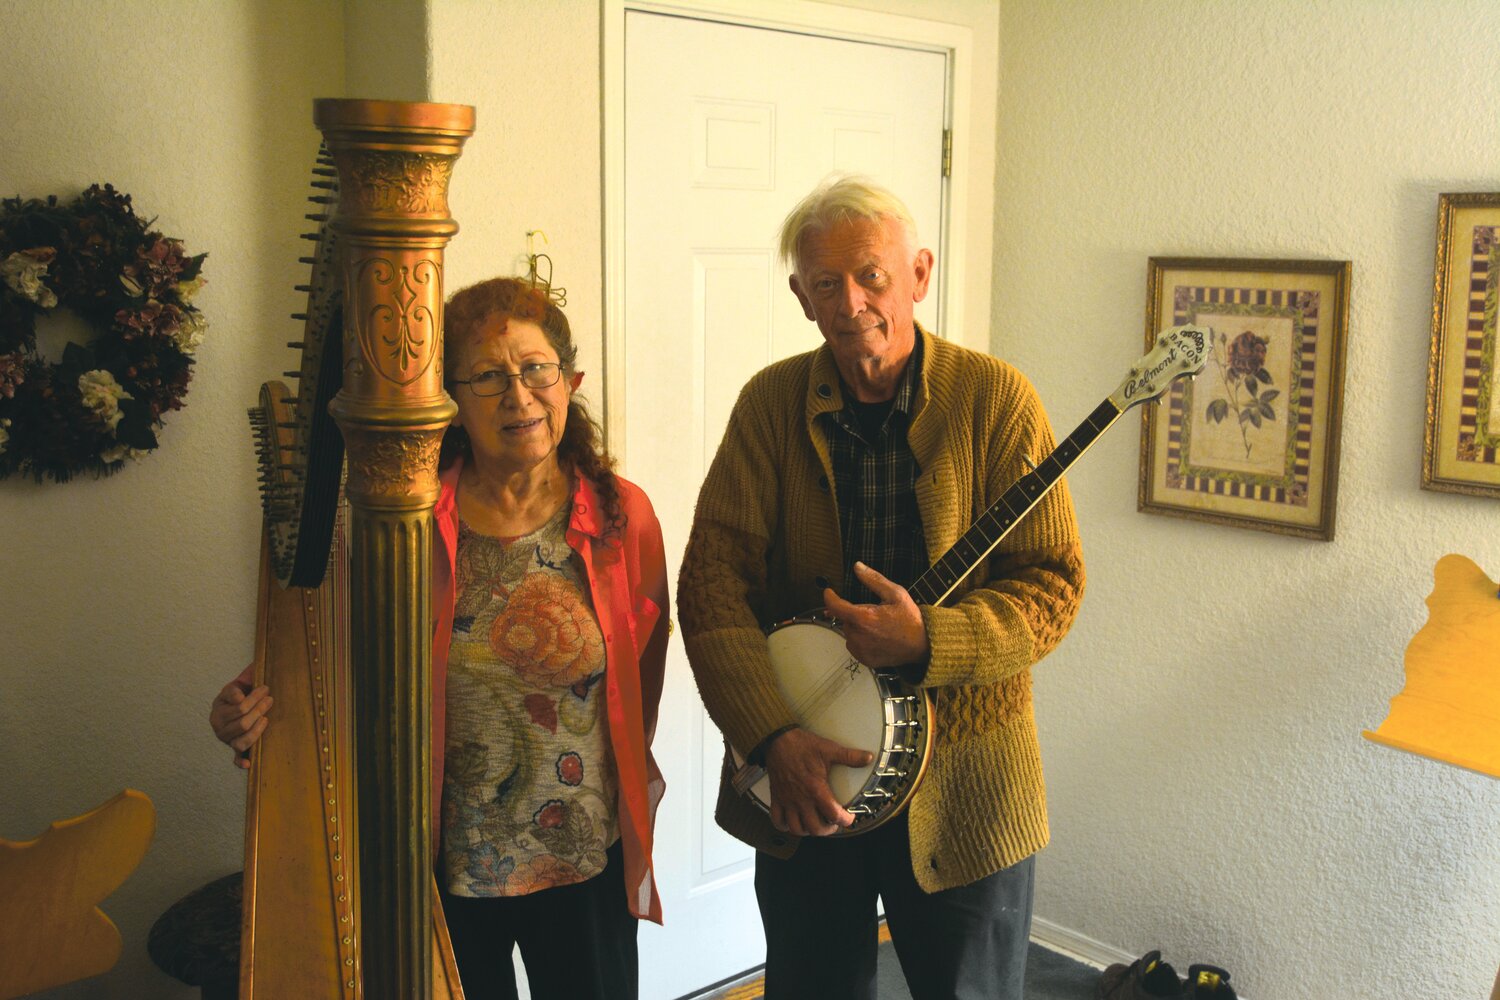 Roy residents Roxie and Bob Goodwin stand with their instruments, a harp and banjo, respectively, in their home on Oct. 24.